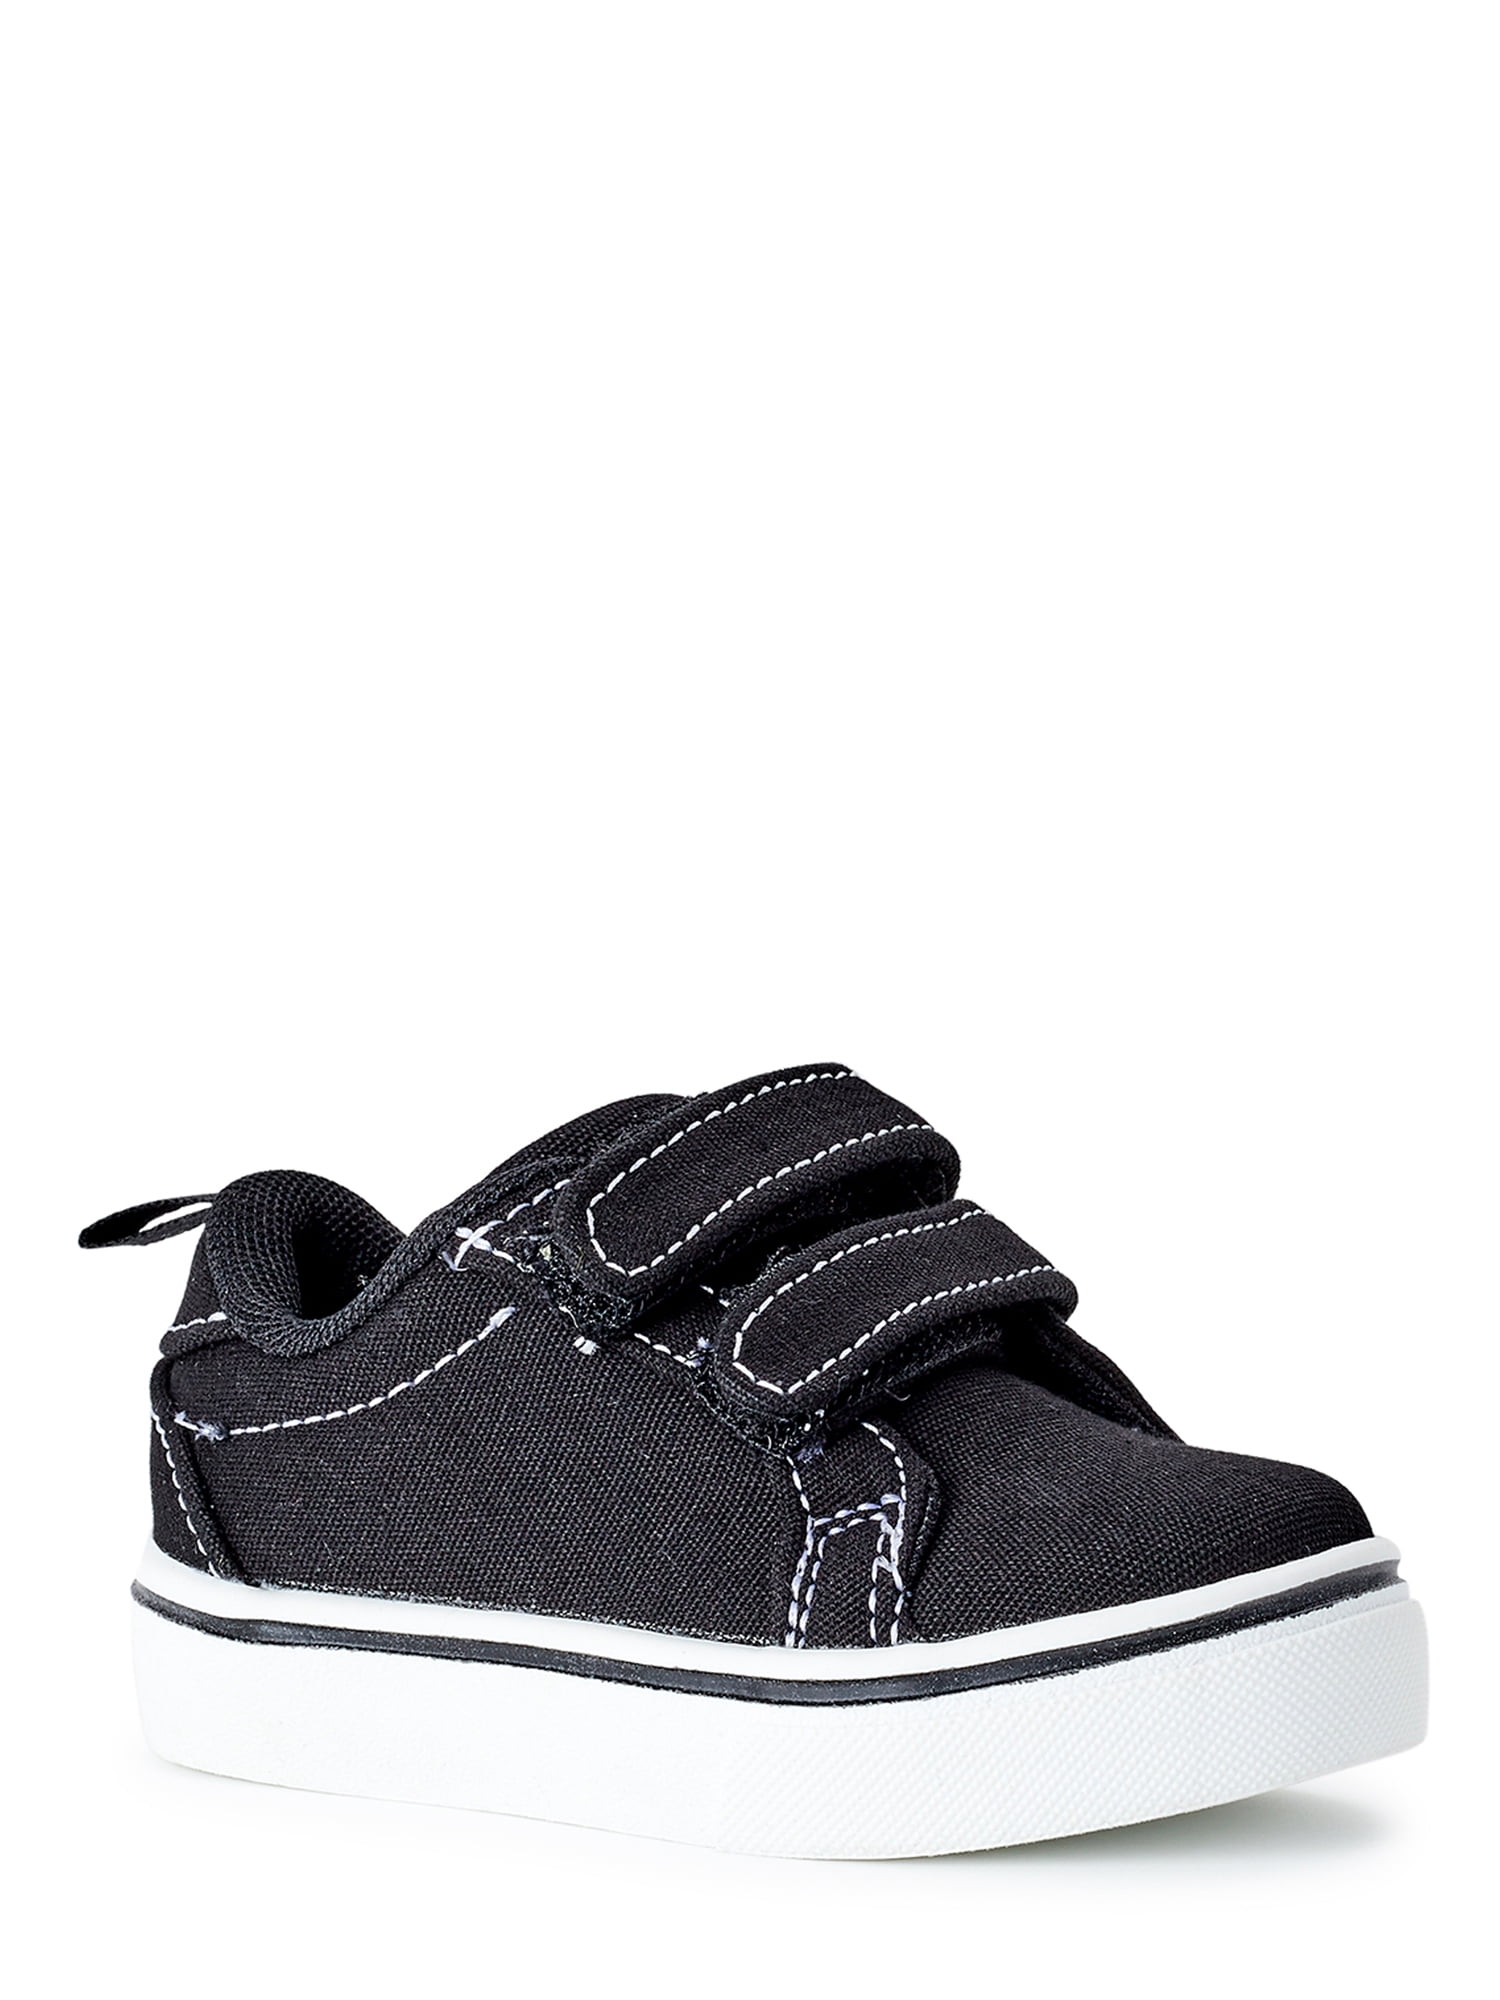 Wonder Nation Baby Boys Casual Strap Shoes, Sizes 2-6